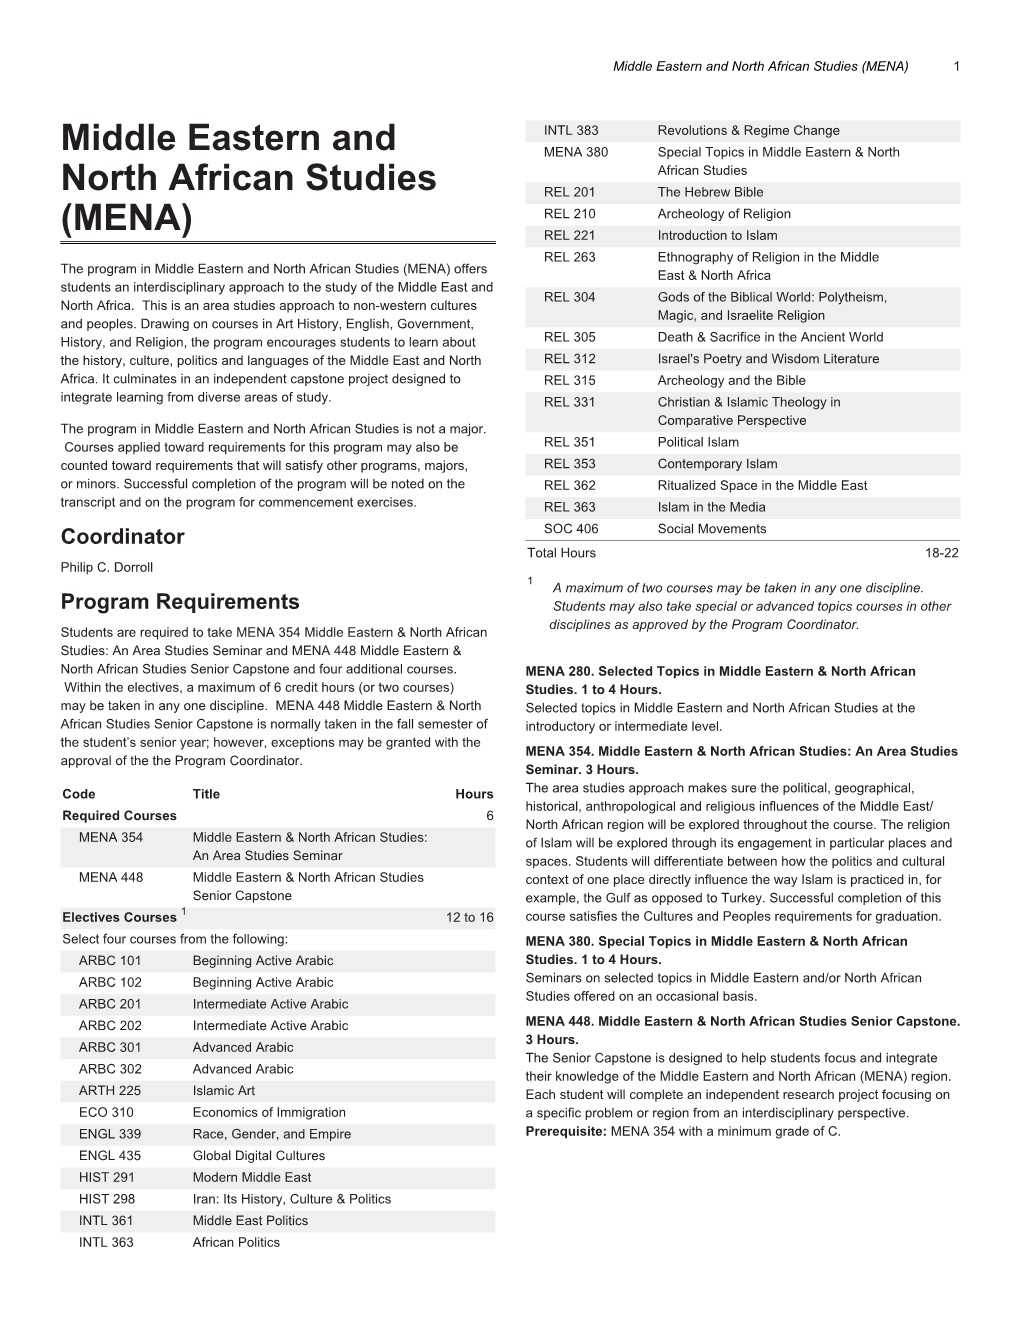 Middle Eastern and North African Studies (MENA) 1